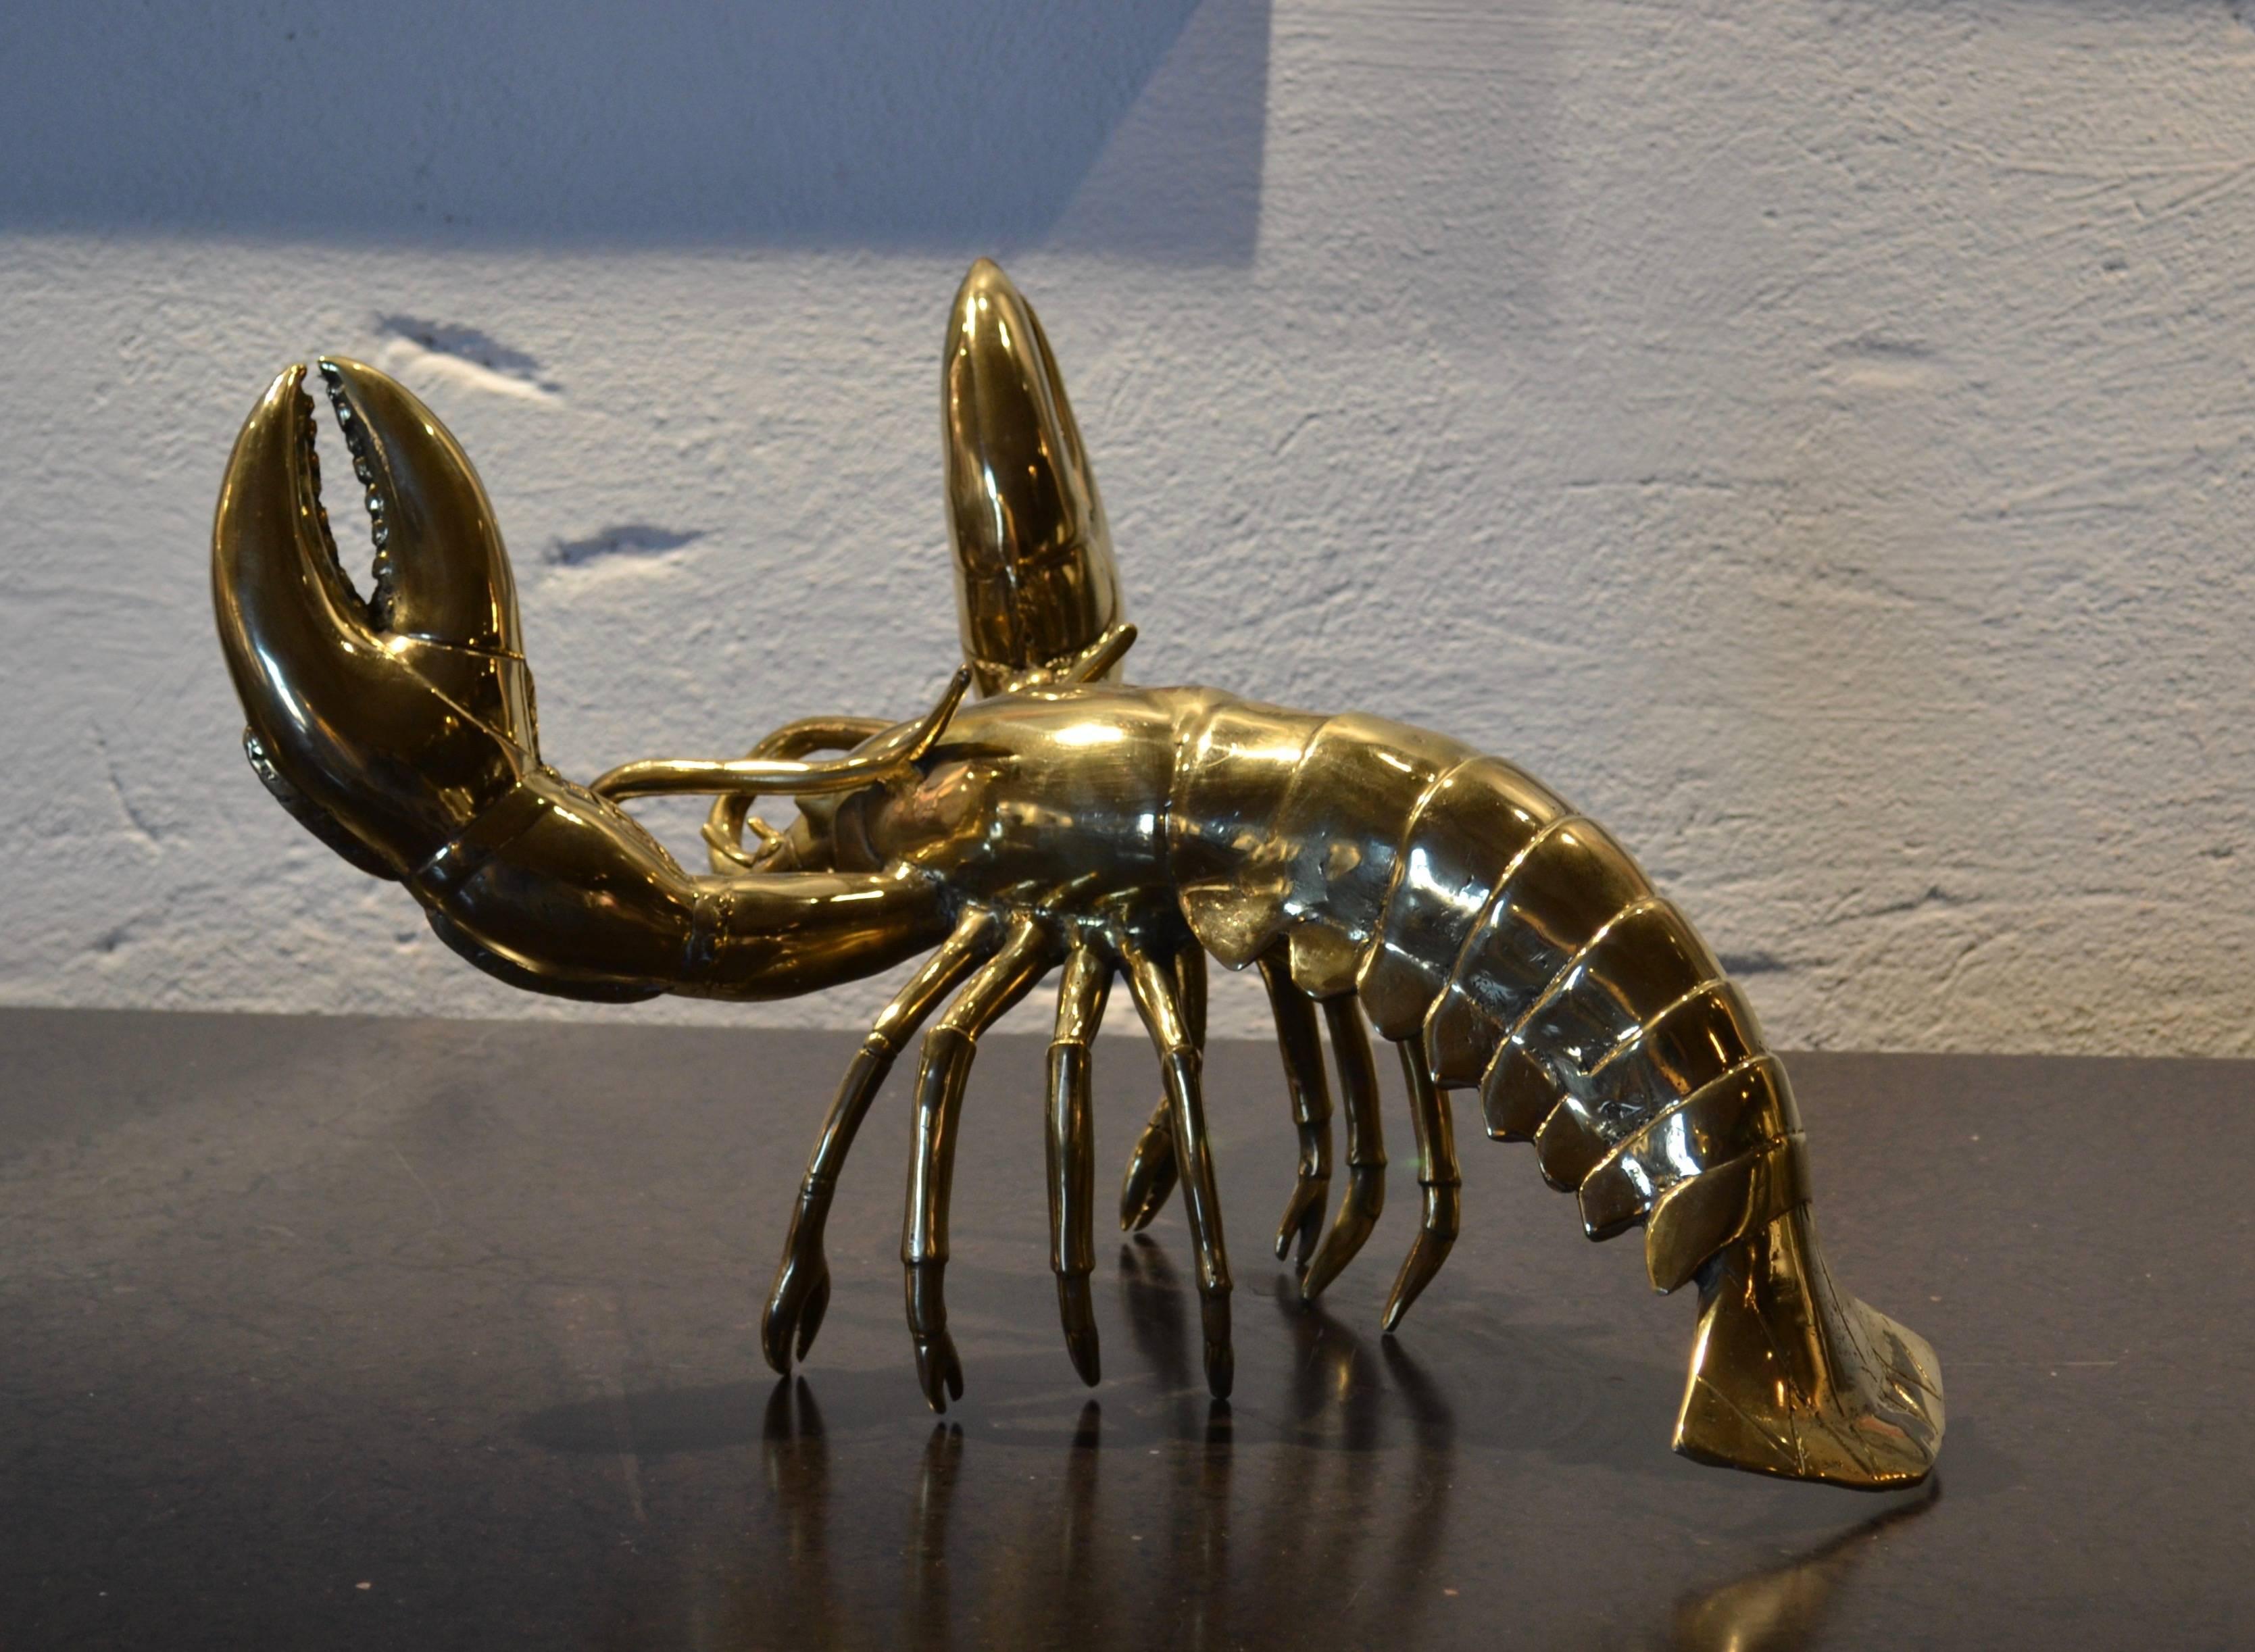 Lobster sculpture in gilt bronze.
The perfect sculpture for a seafood lover, fisherman or seafood restaurant.
It has excellent patina and is a definite centrepiece of the room.
A rare seen wow factor in this object.